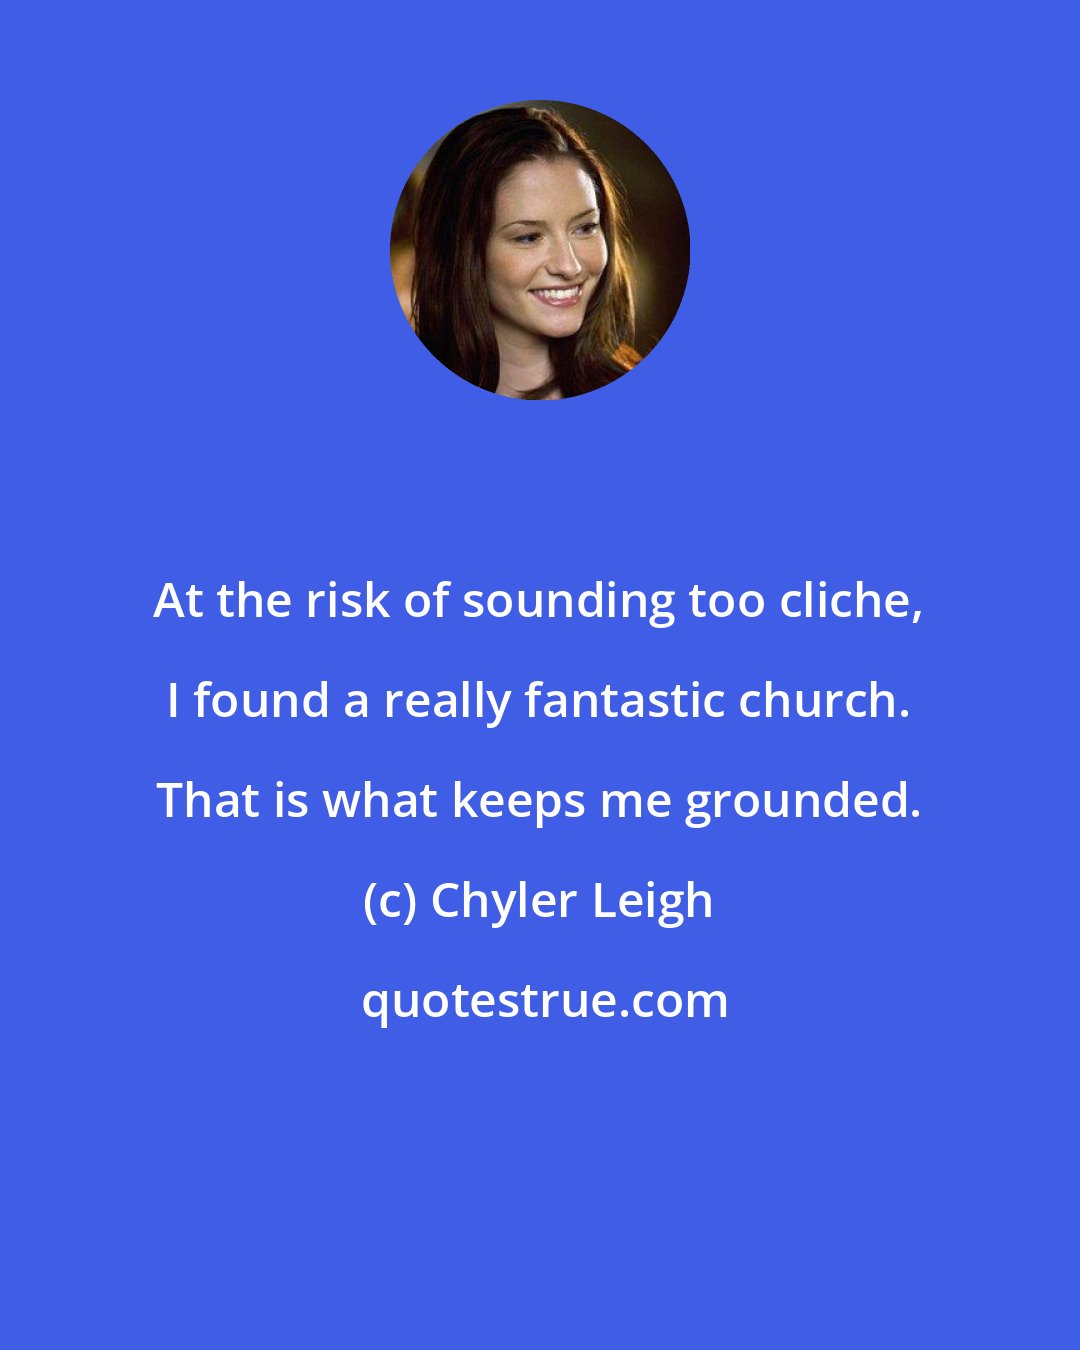 Chyler Leigh: At the risk of sounding too cliche, I found a really fantastic church. That is what keeps me grounded.